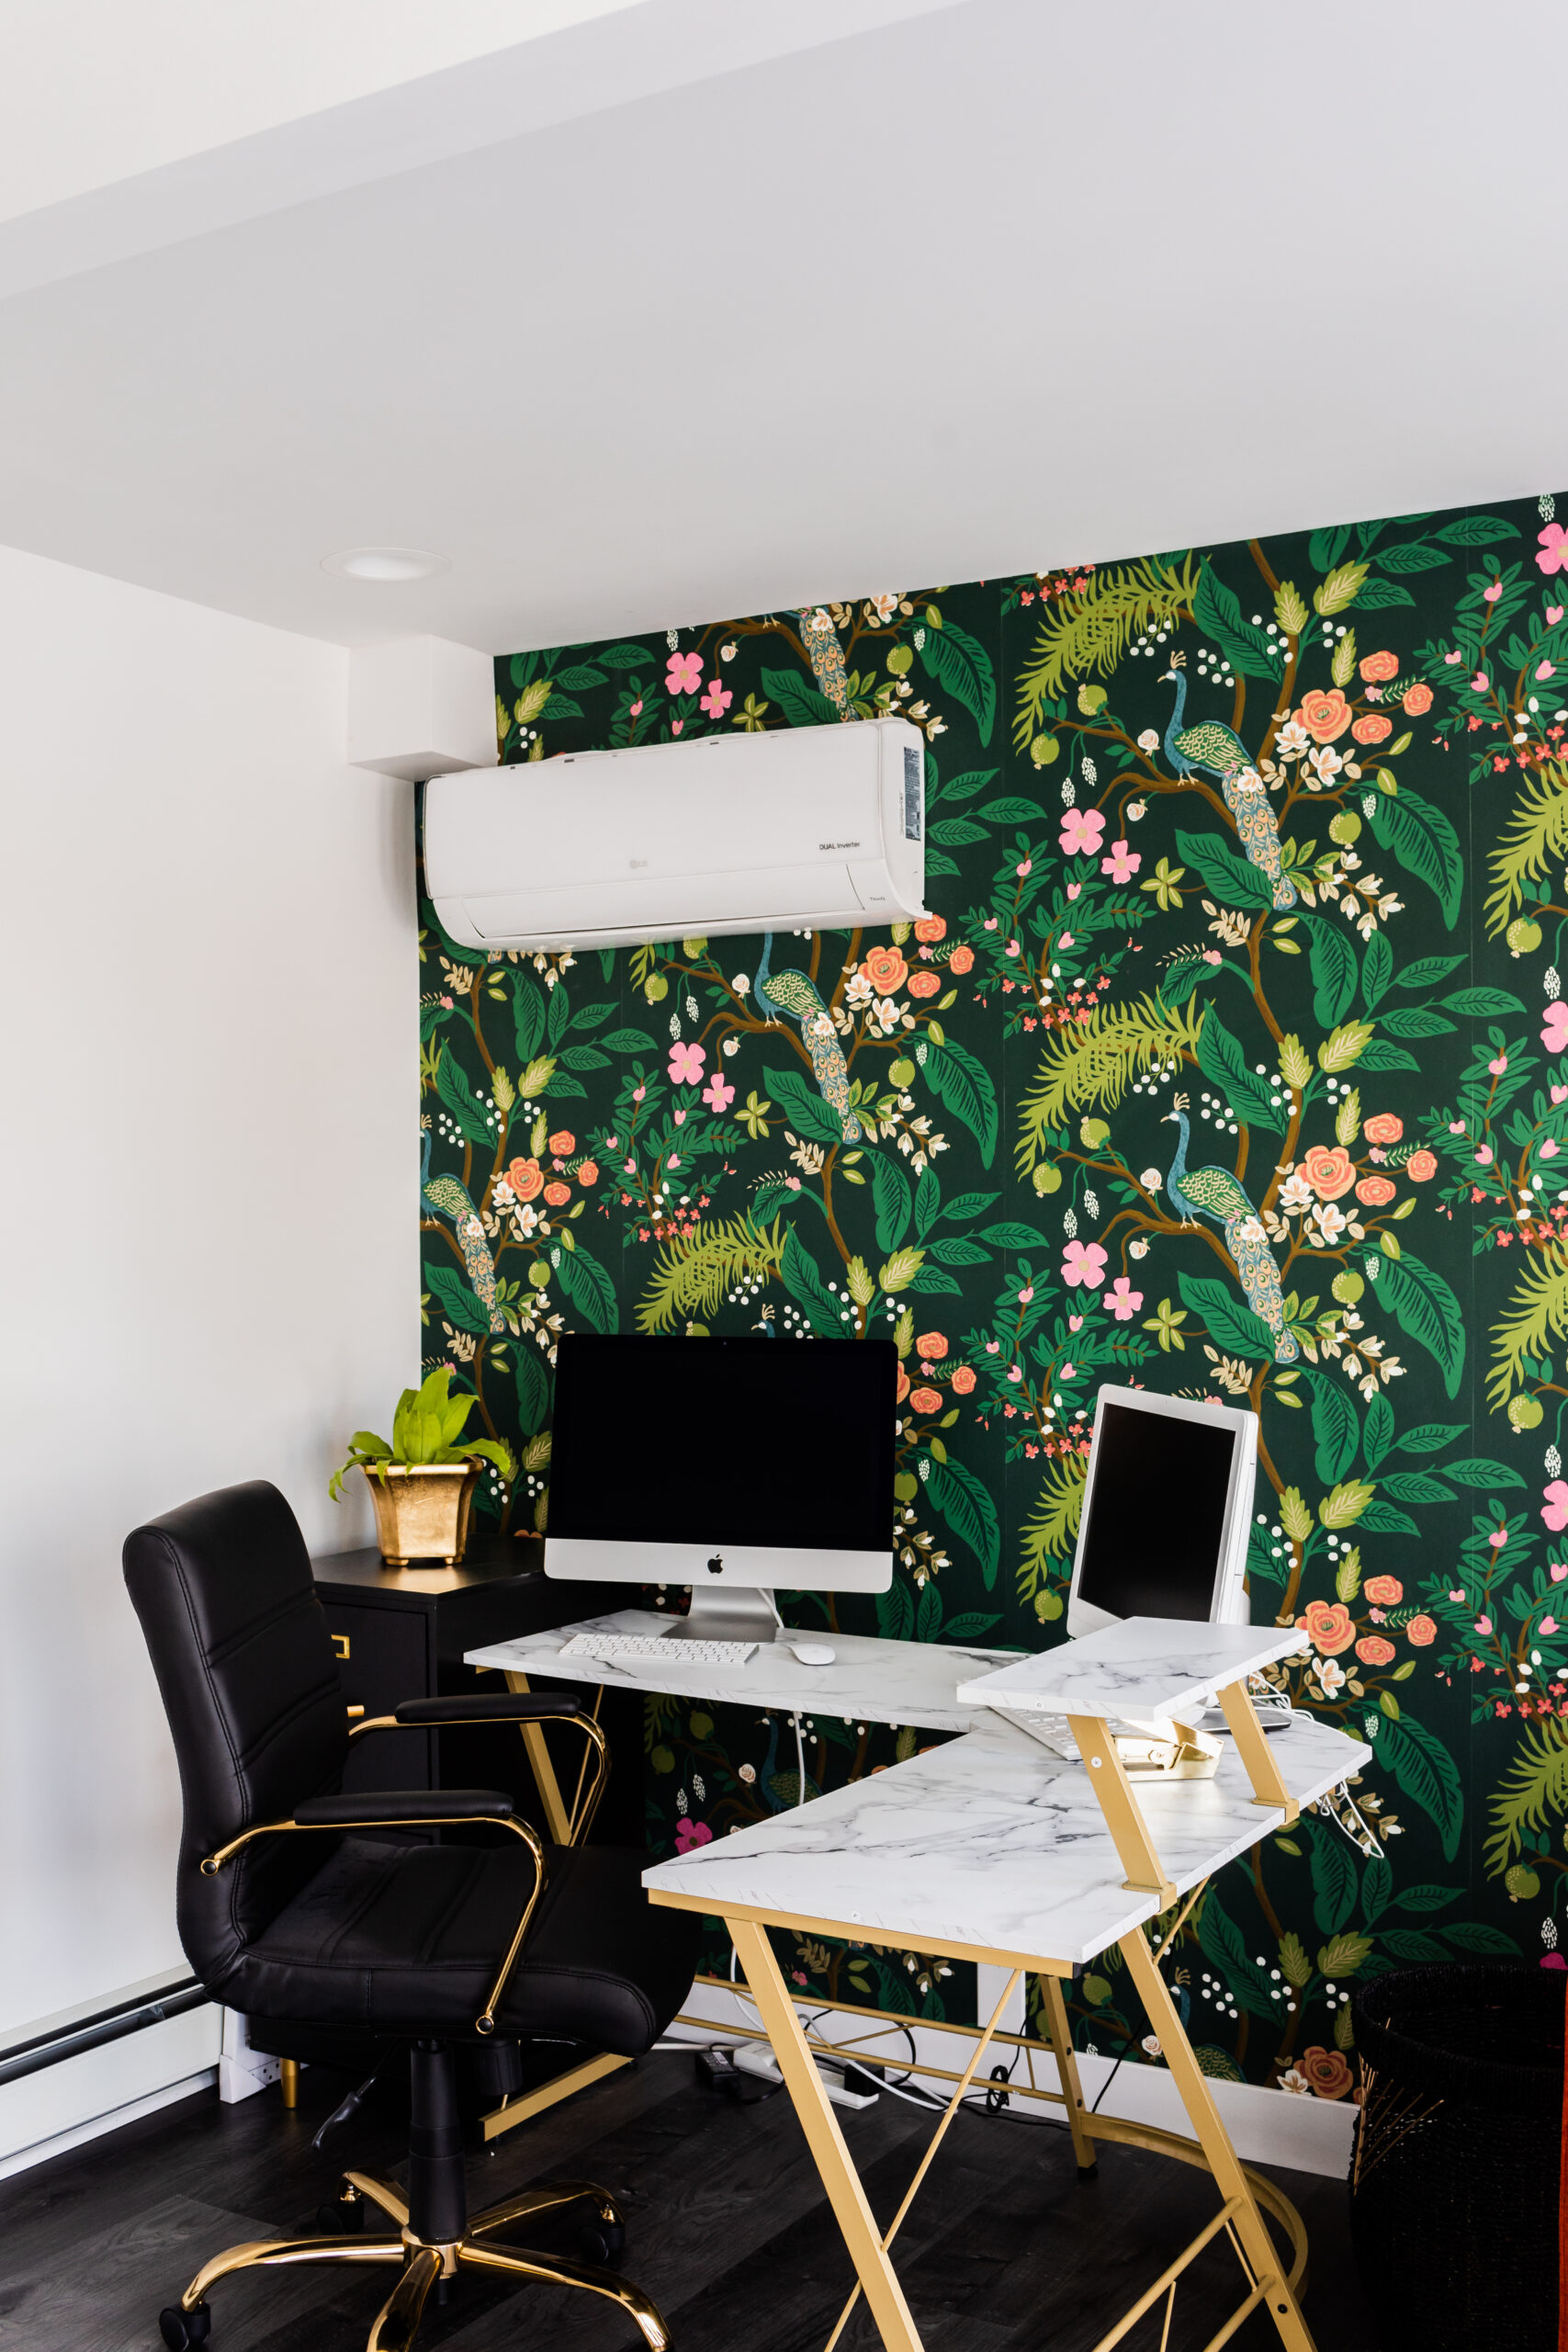 wallpaper ideas for the home office